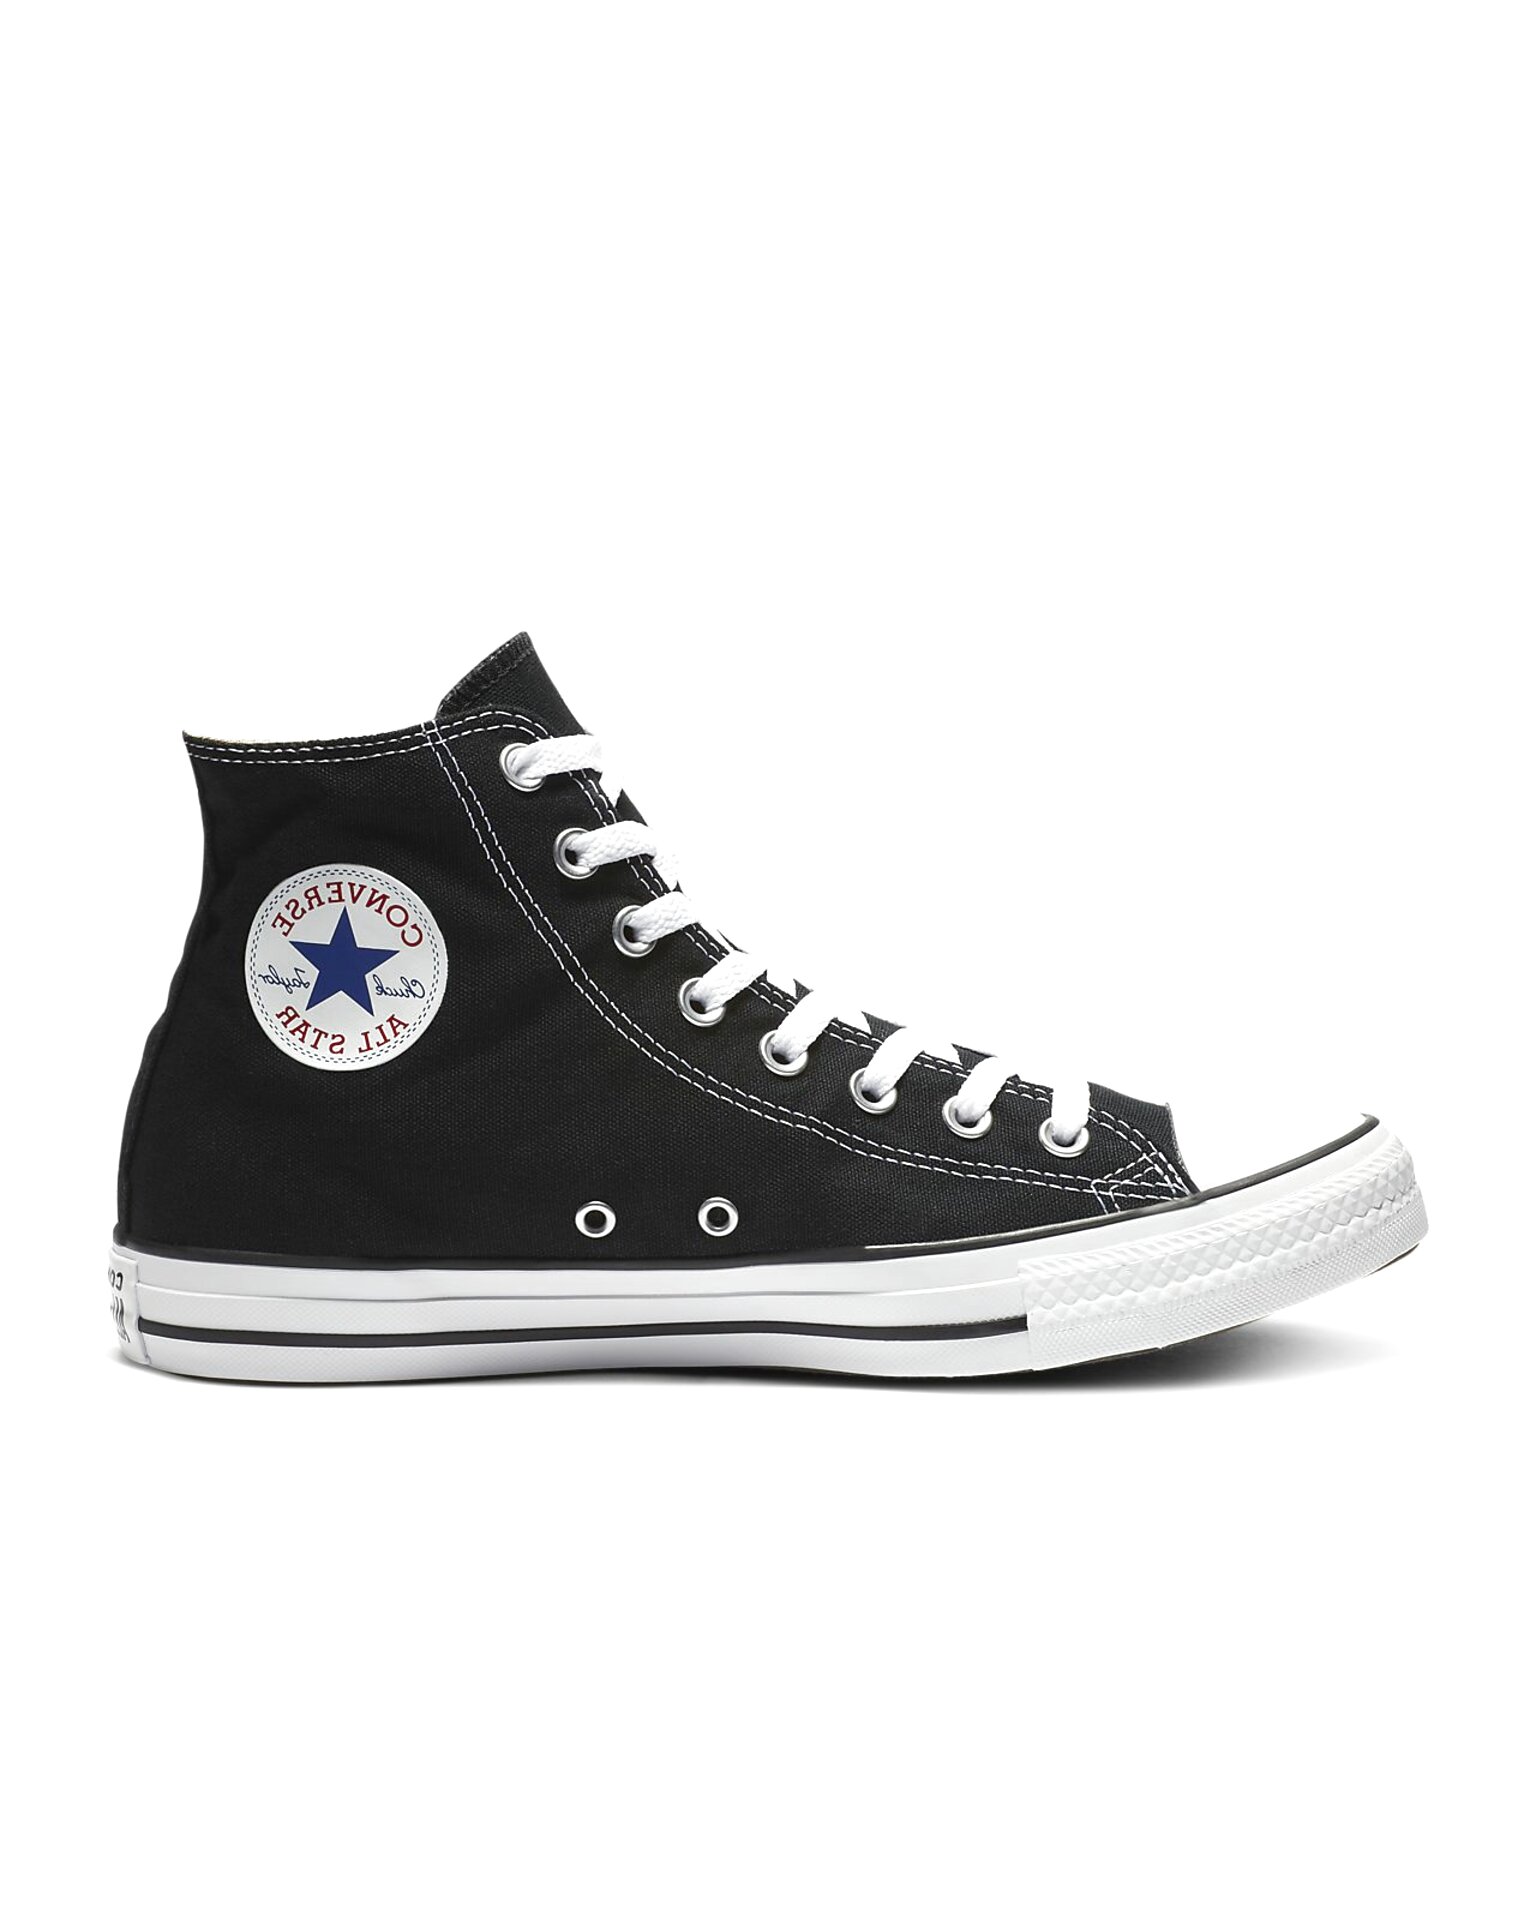 Converse for sale in UK | 93 used Converses